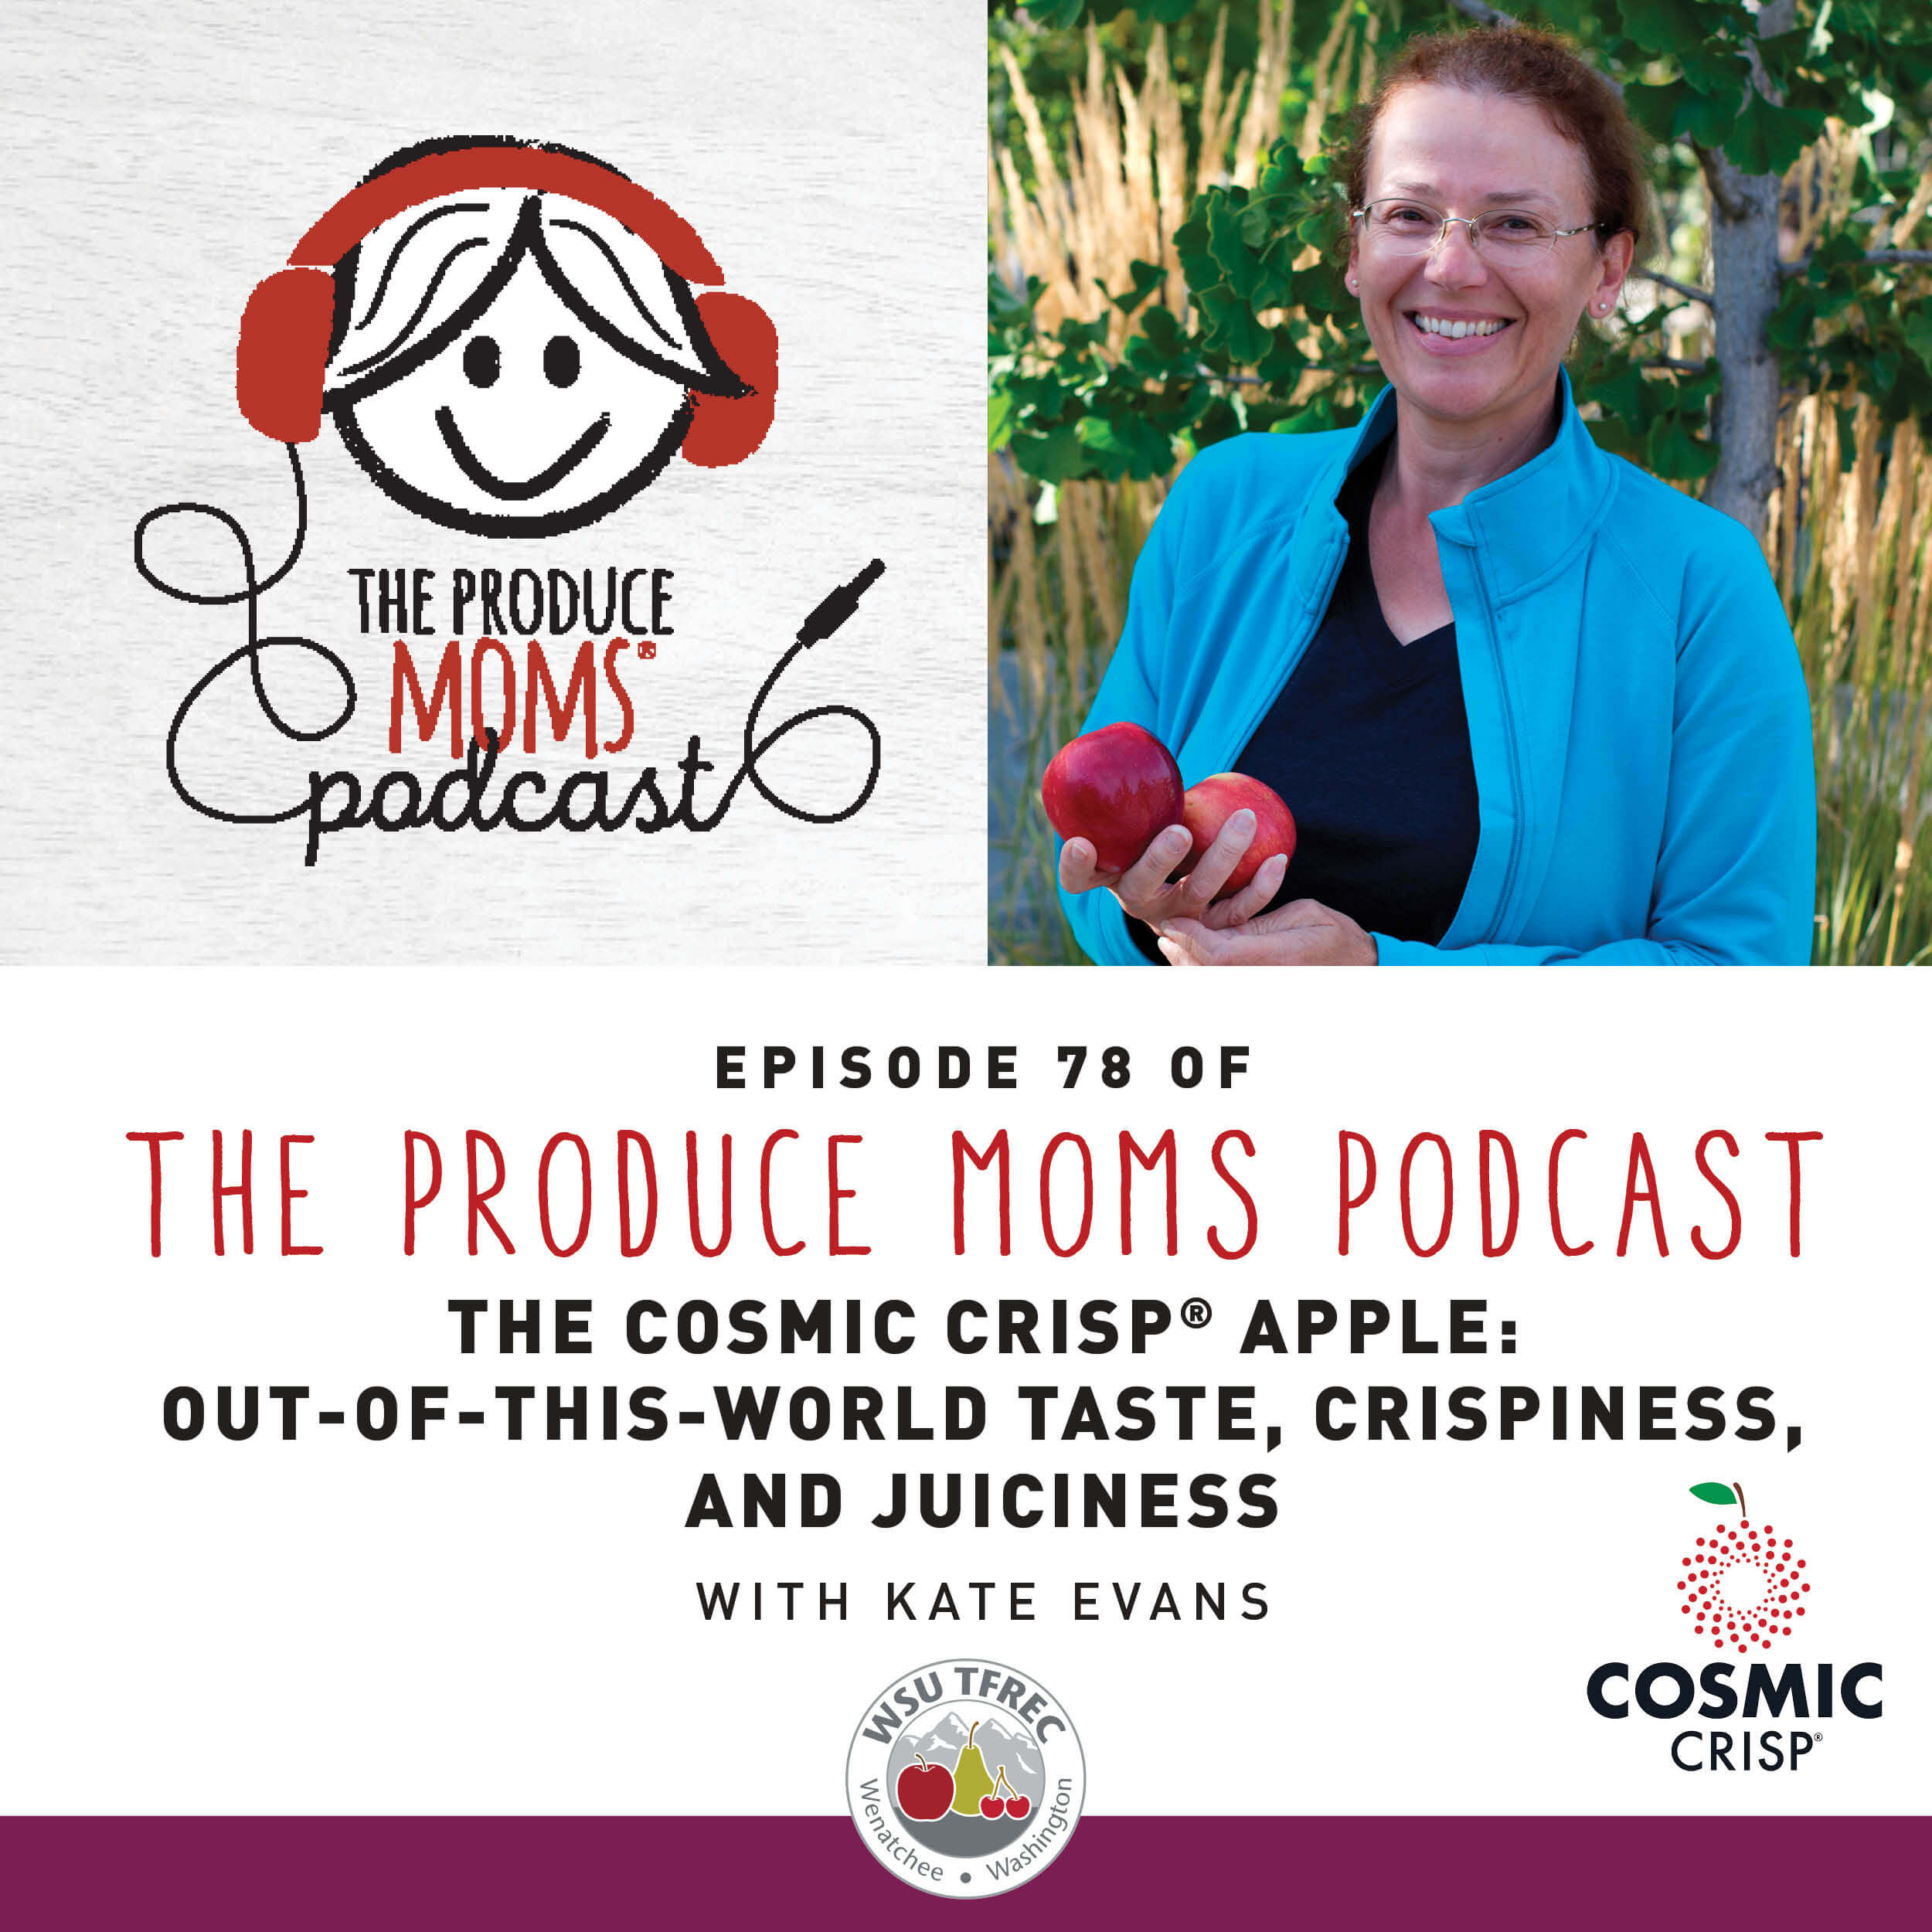 Episode 78: The Cosmic Crisp® Apple: Out-of-This-World Taste, Crispiness, and Juiciness with Kate Evans